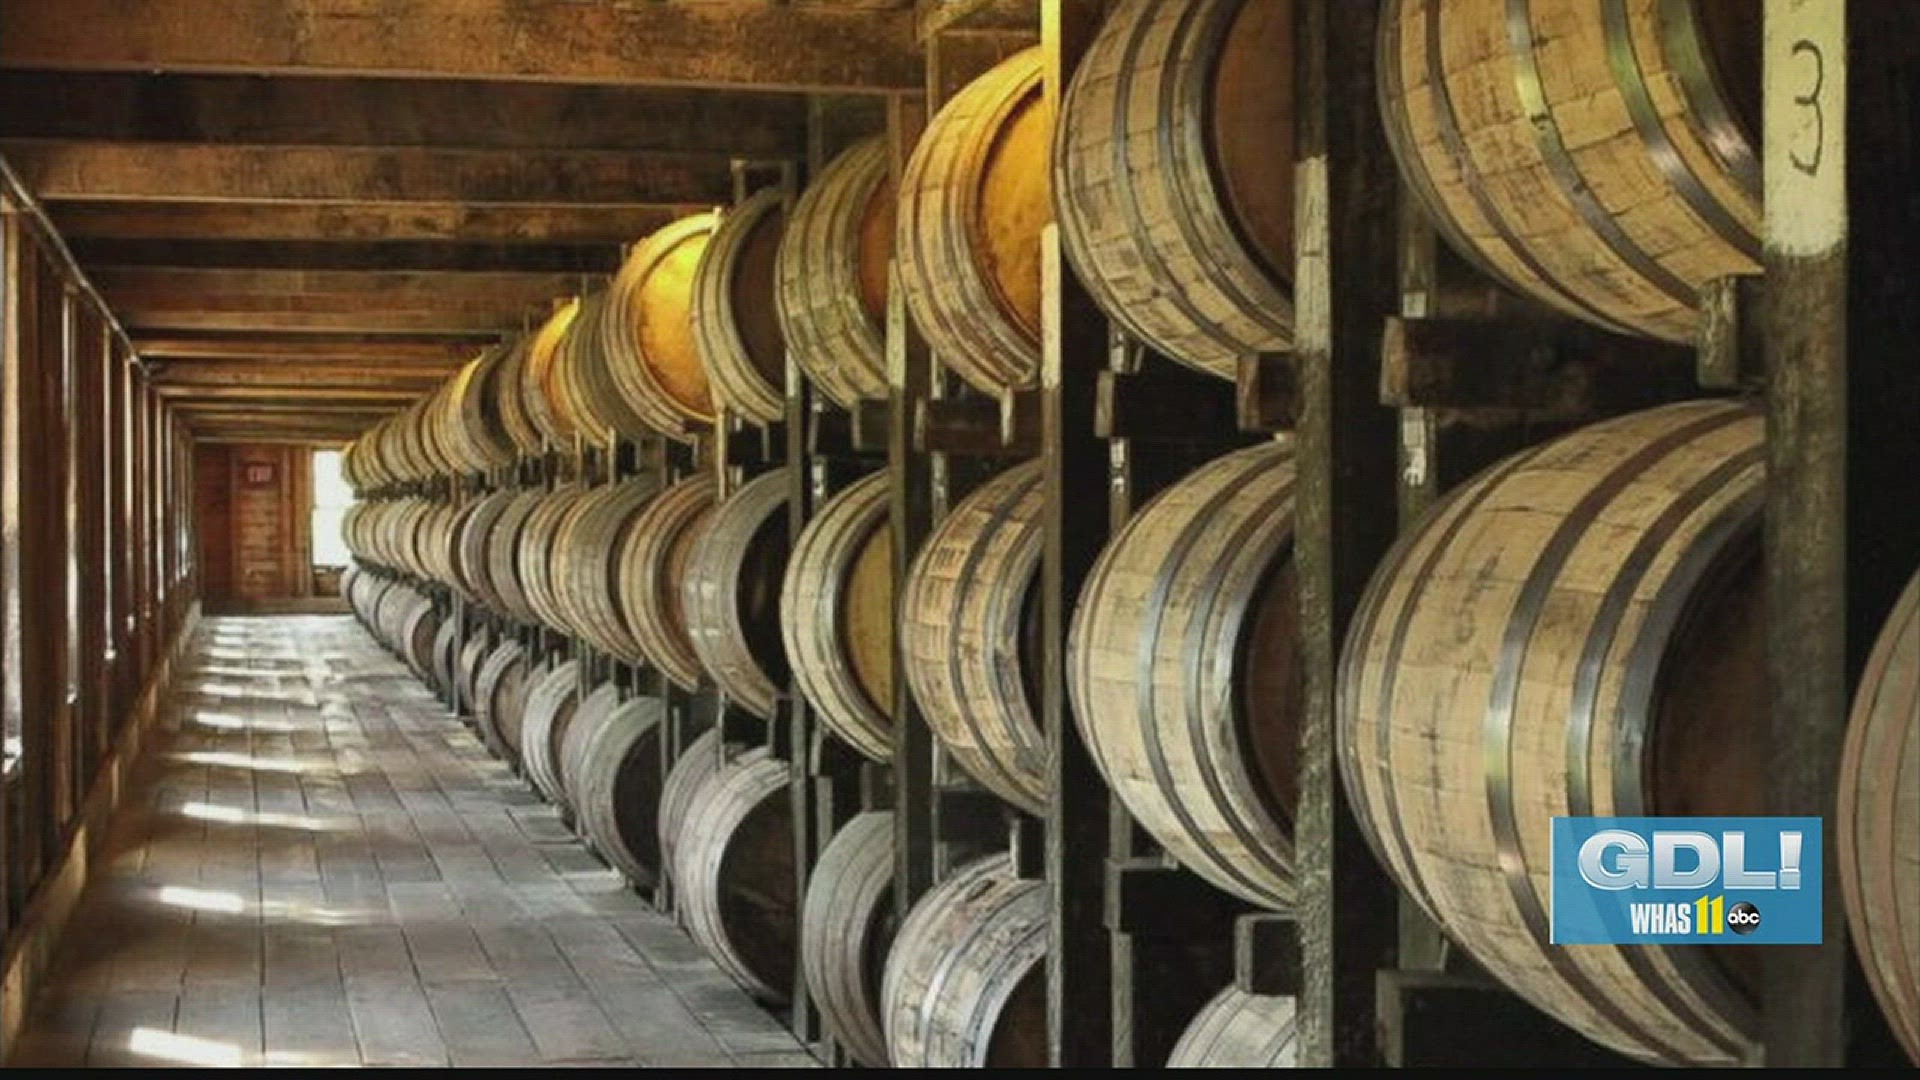 Take a trip to Marion County, Kentucky and see the sights, including the Maker's Mark Distillery.